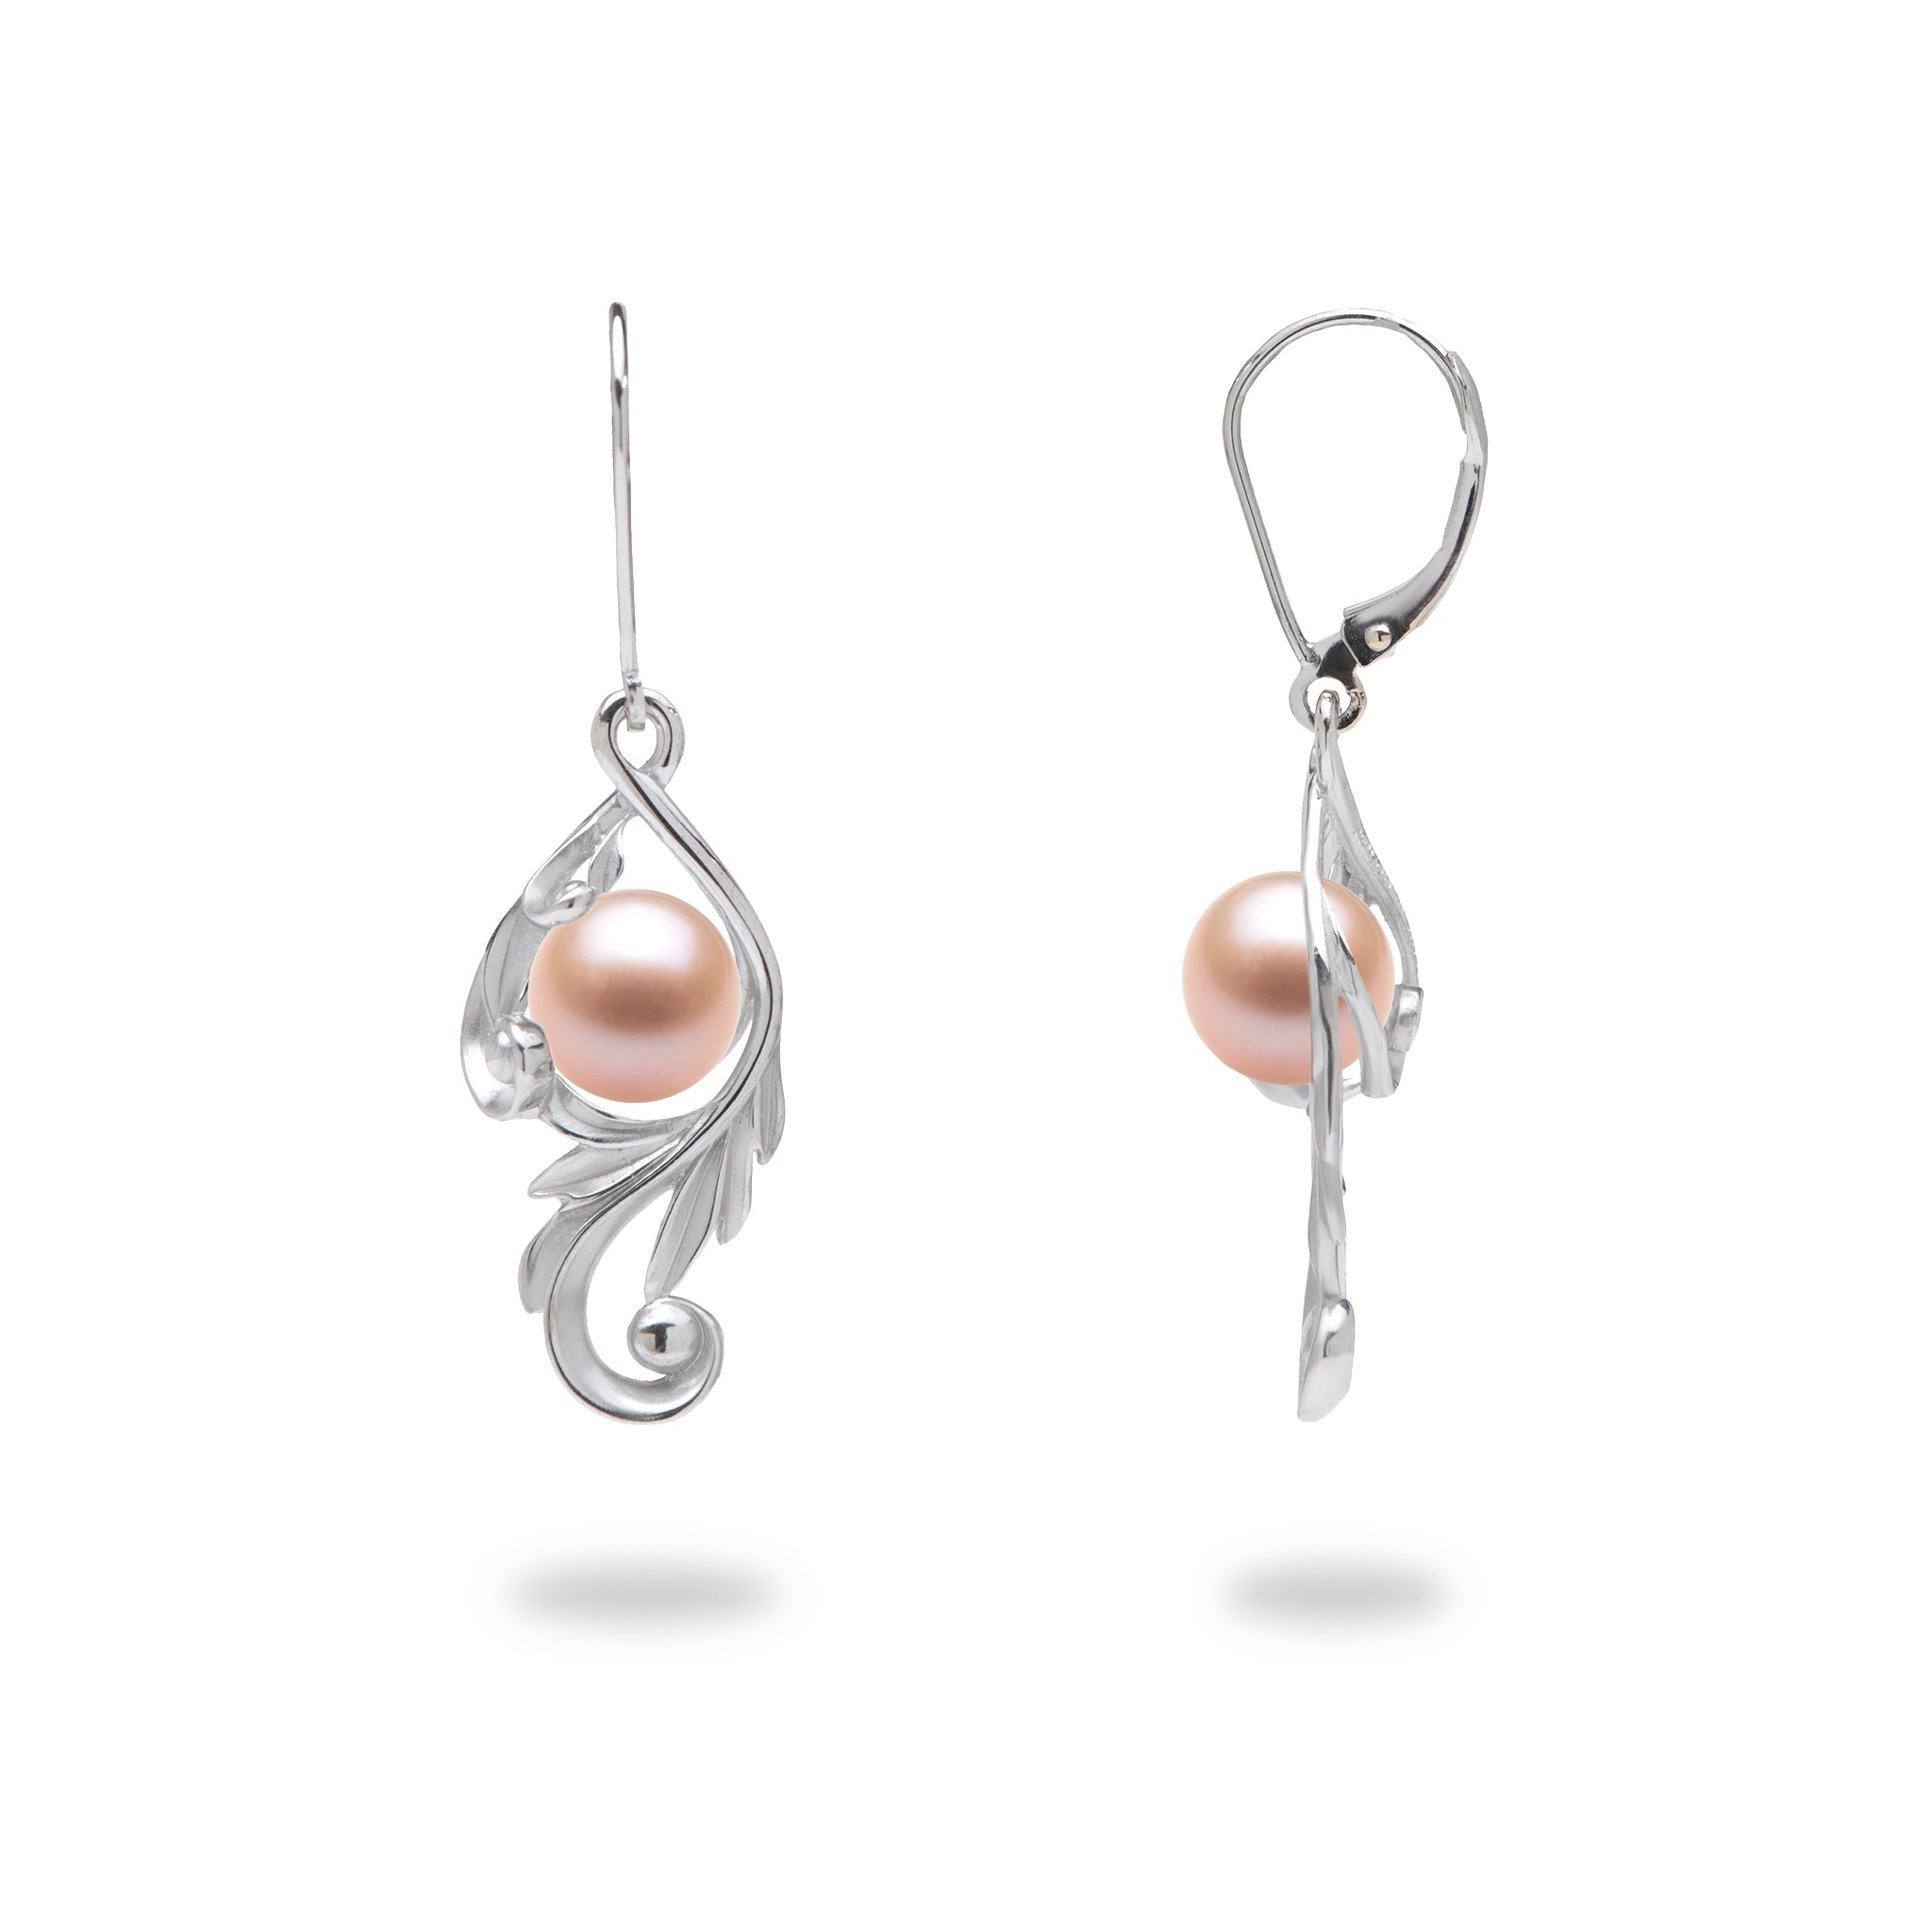 Pick A Pearl Maile Scroll Earrings in White Gold